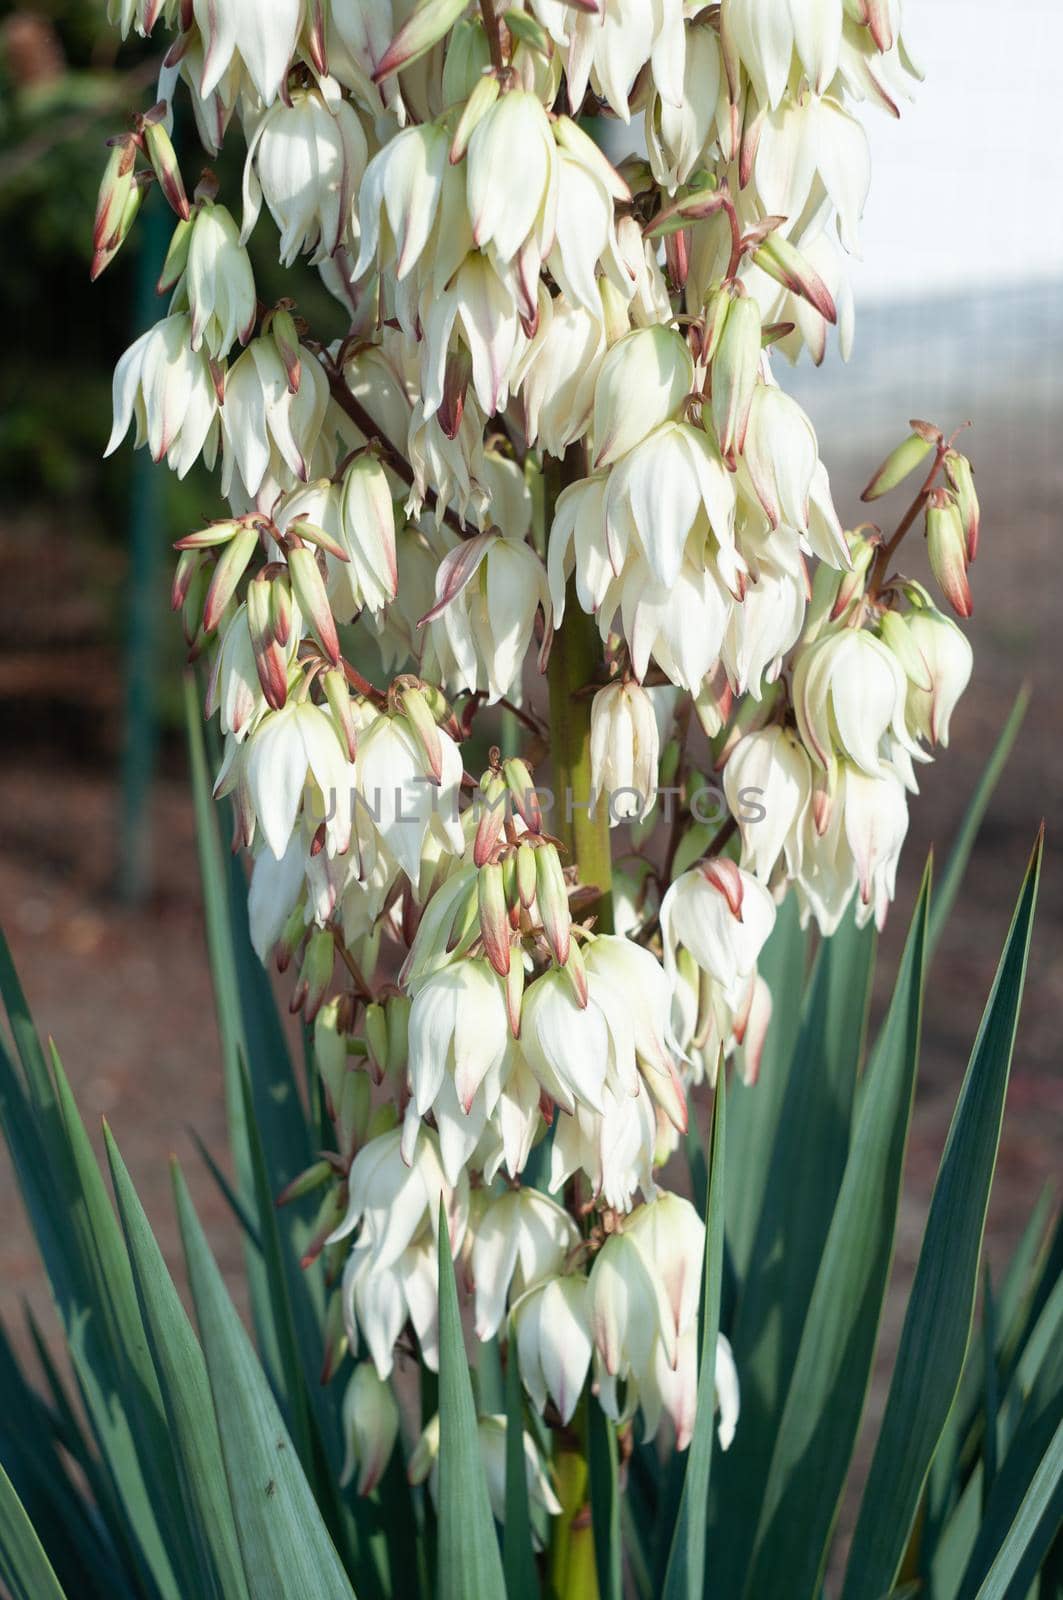 large creamy flowers on the inflorescence of garden yucca, beauty in nature by KaterinaDalemans